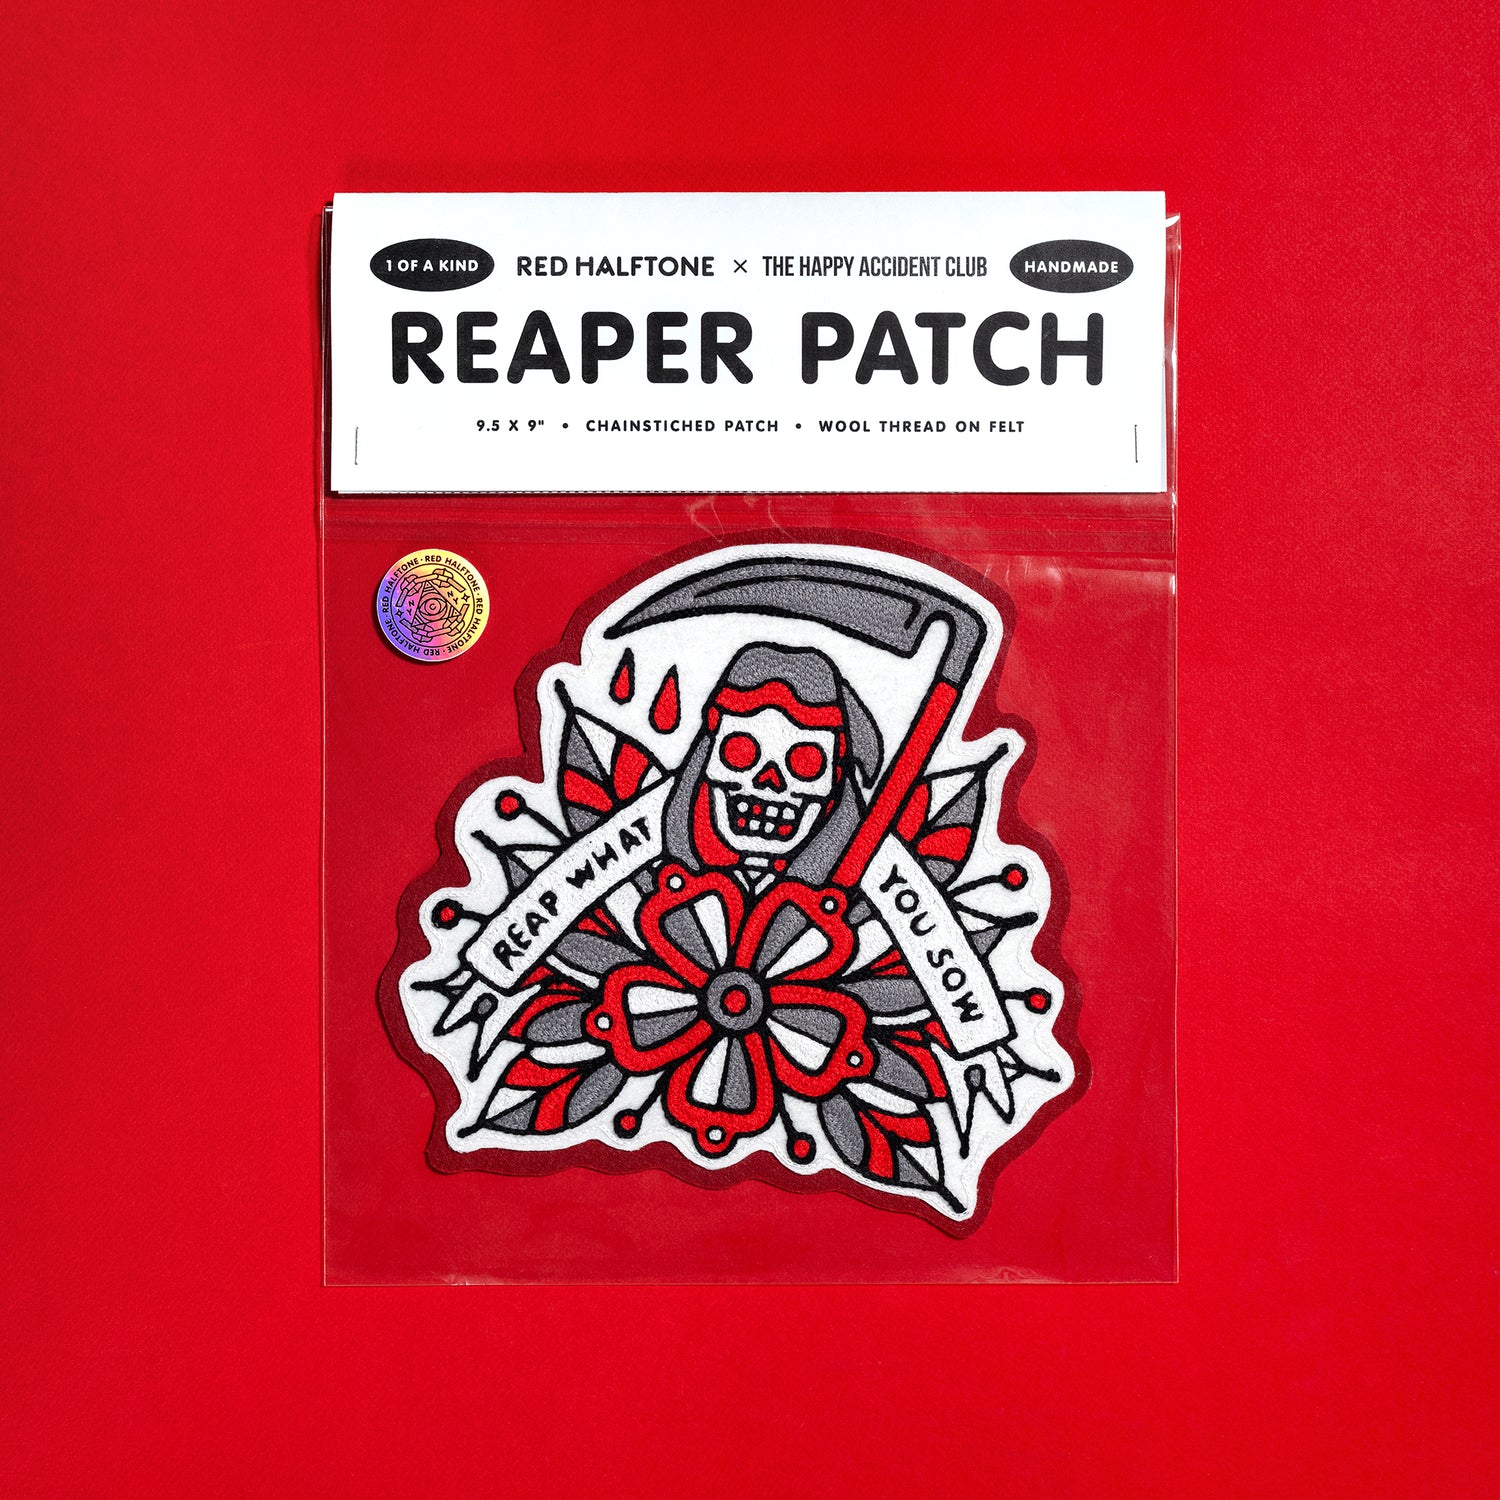 Red Halftone x The Happy Accident Club Oversized Reaper Patch